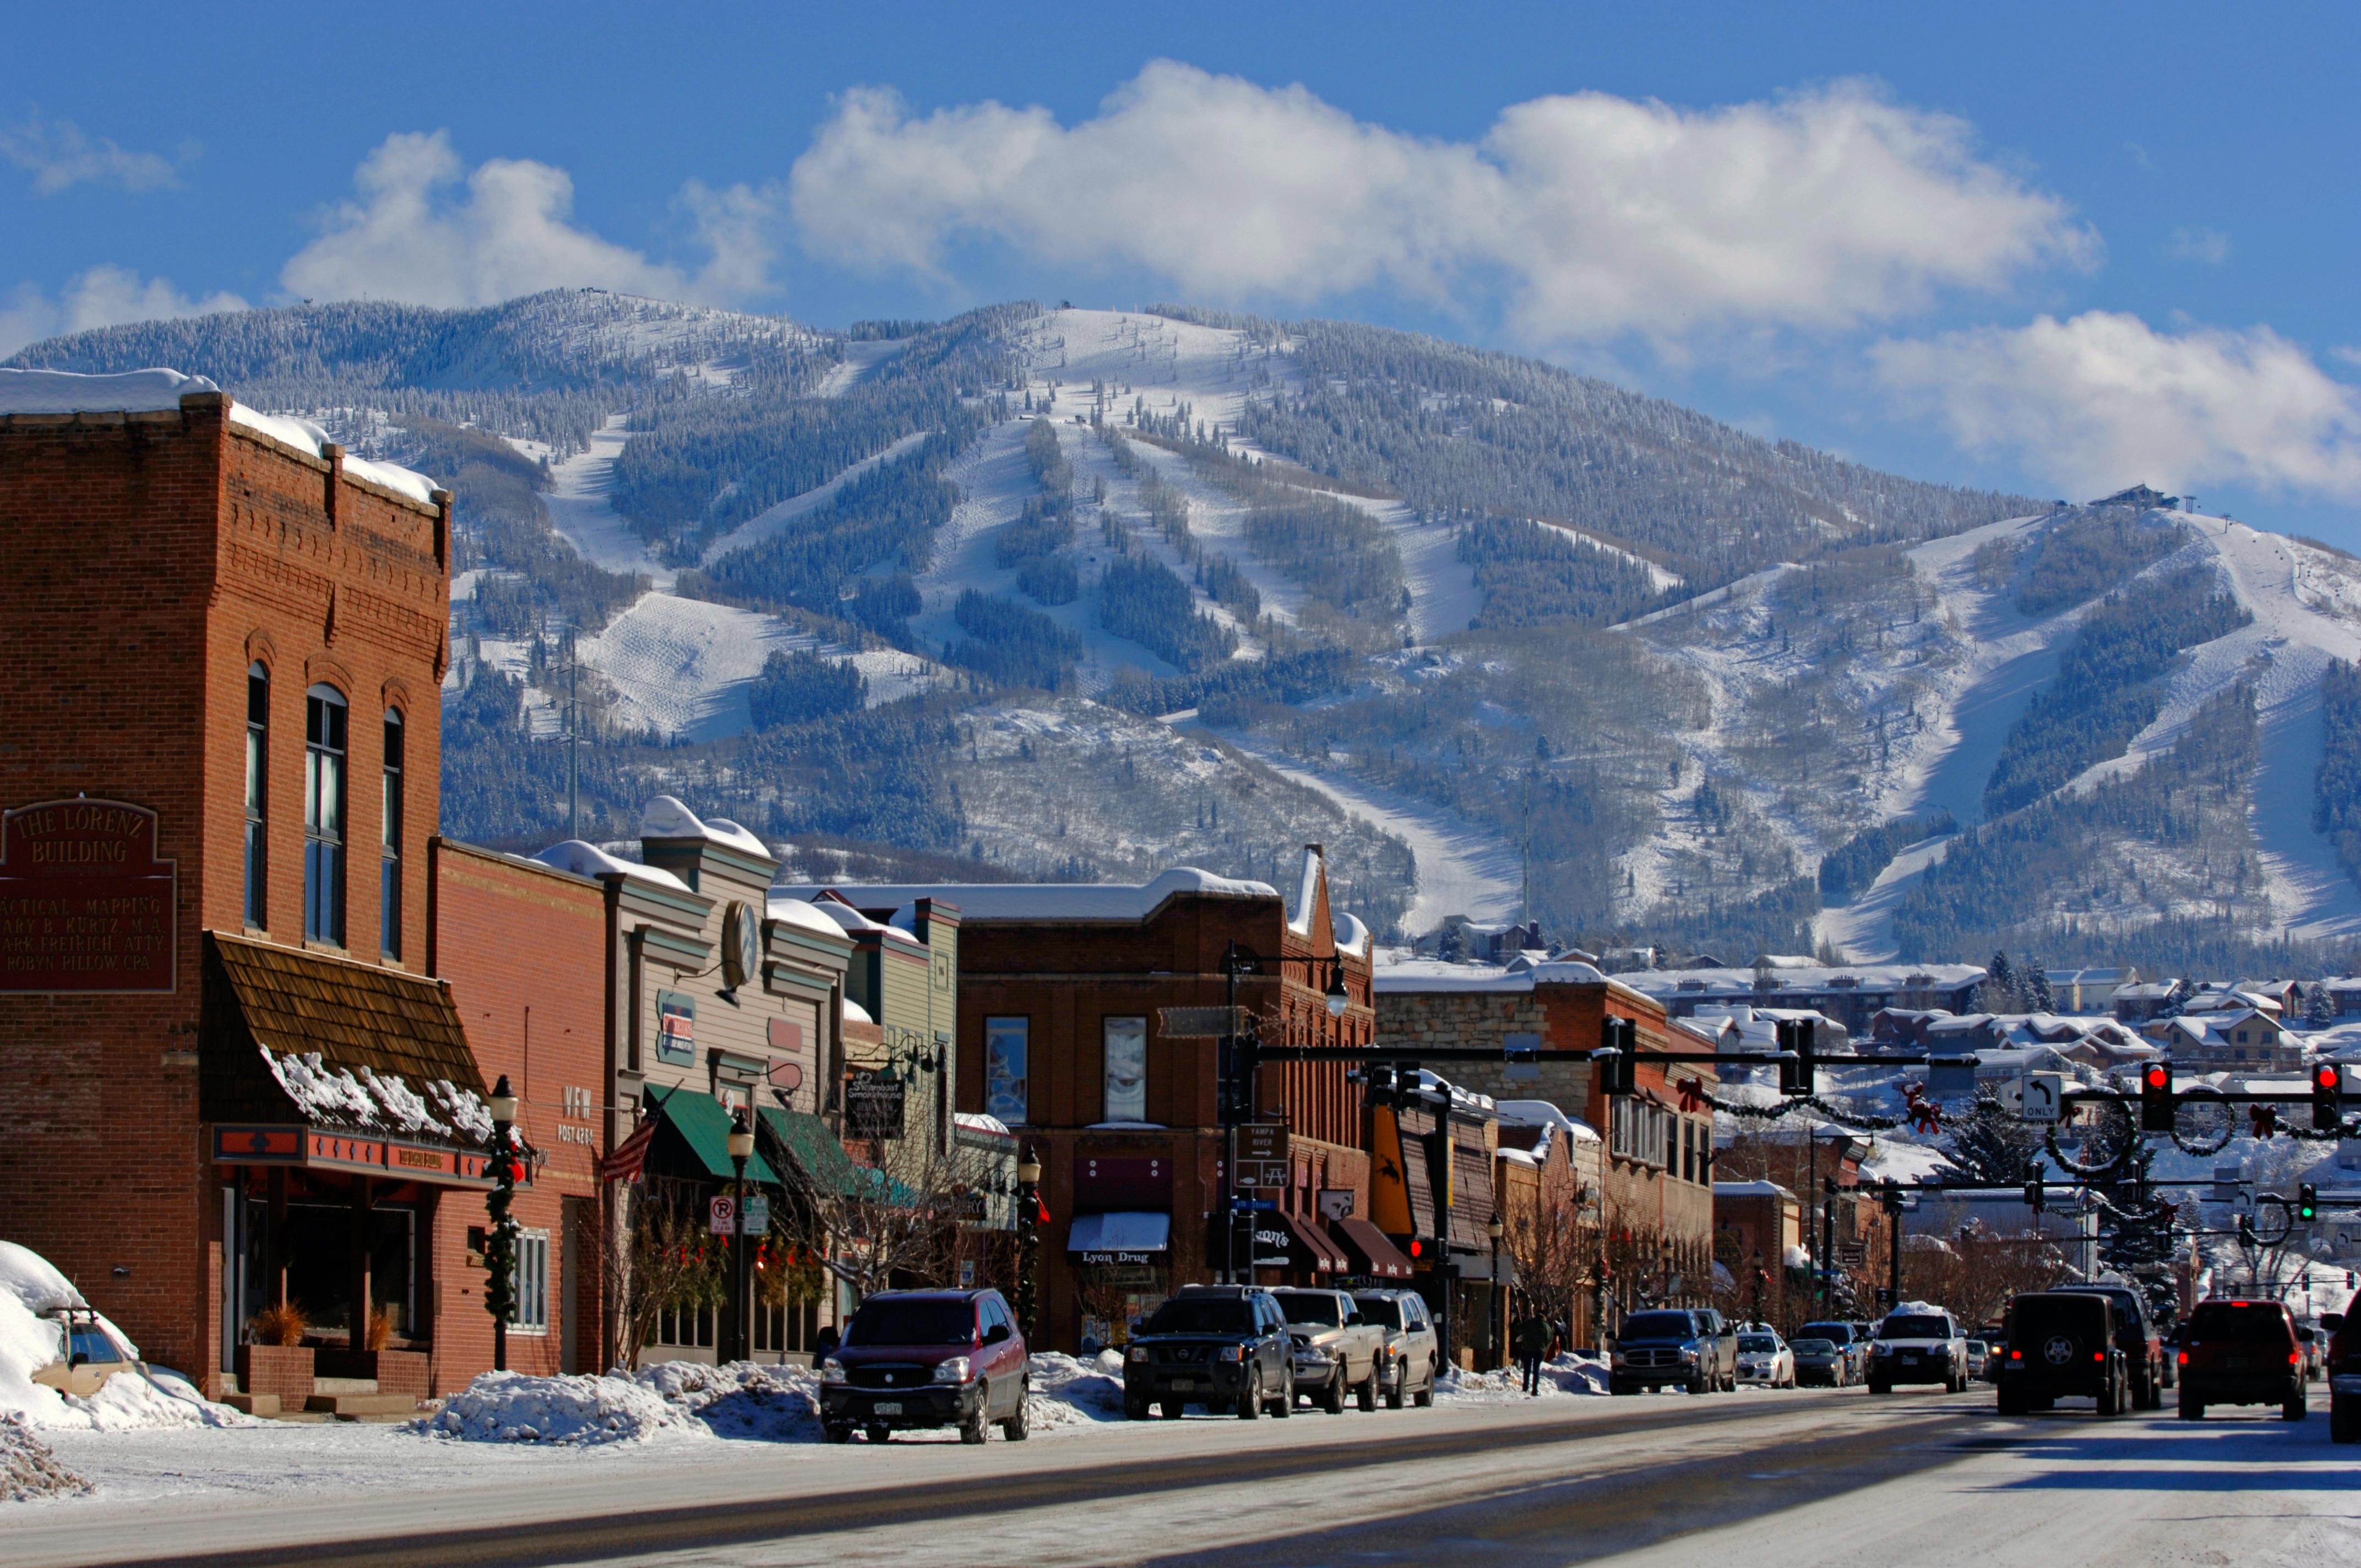 Scenic view of a mountain town with a ski resort in the distance